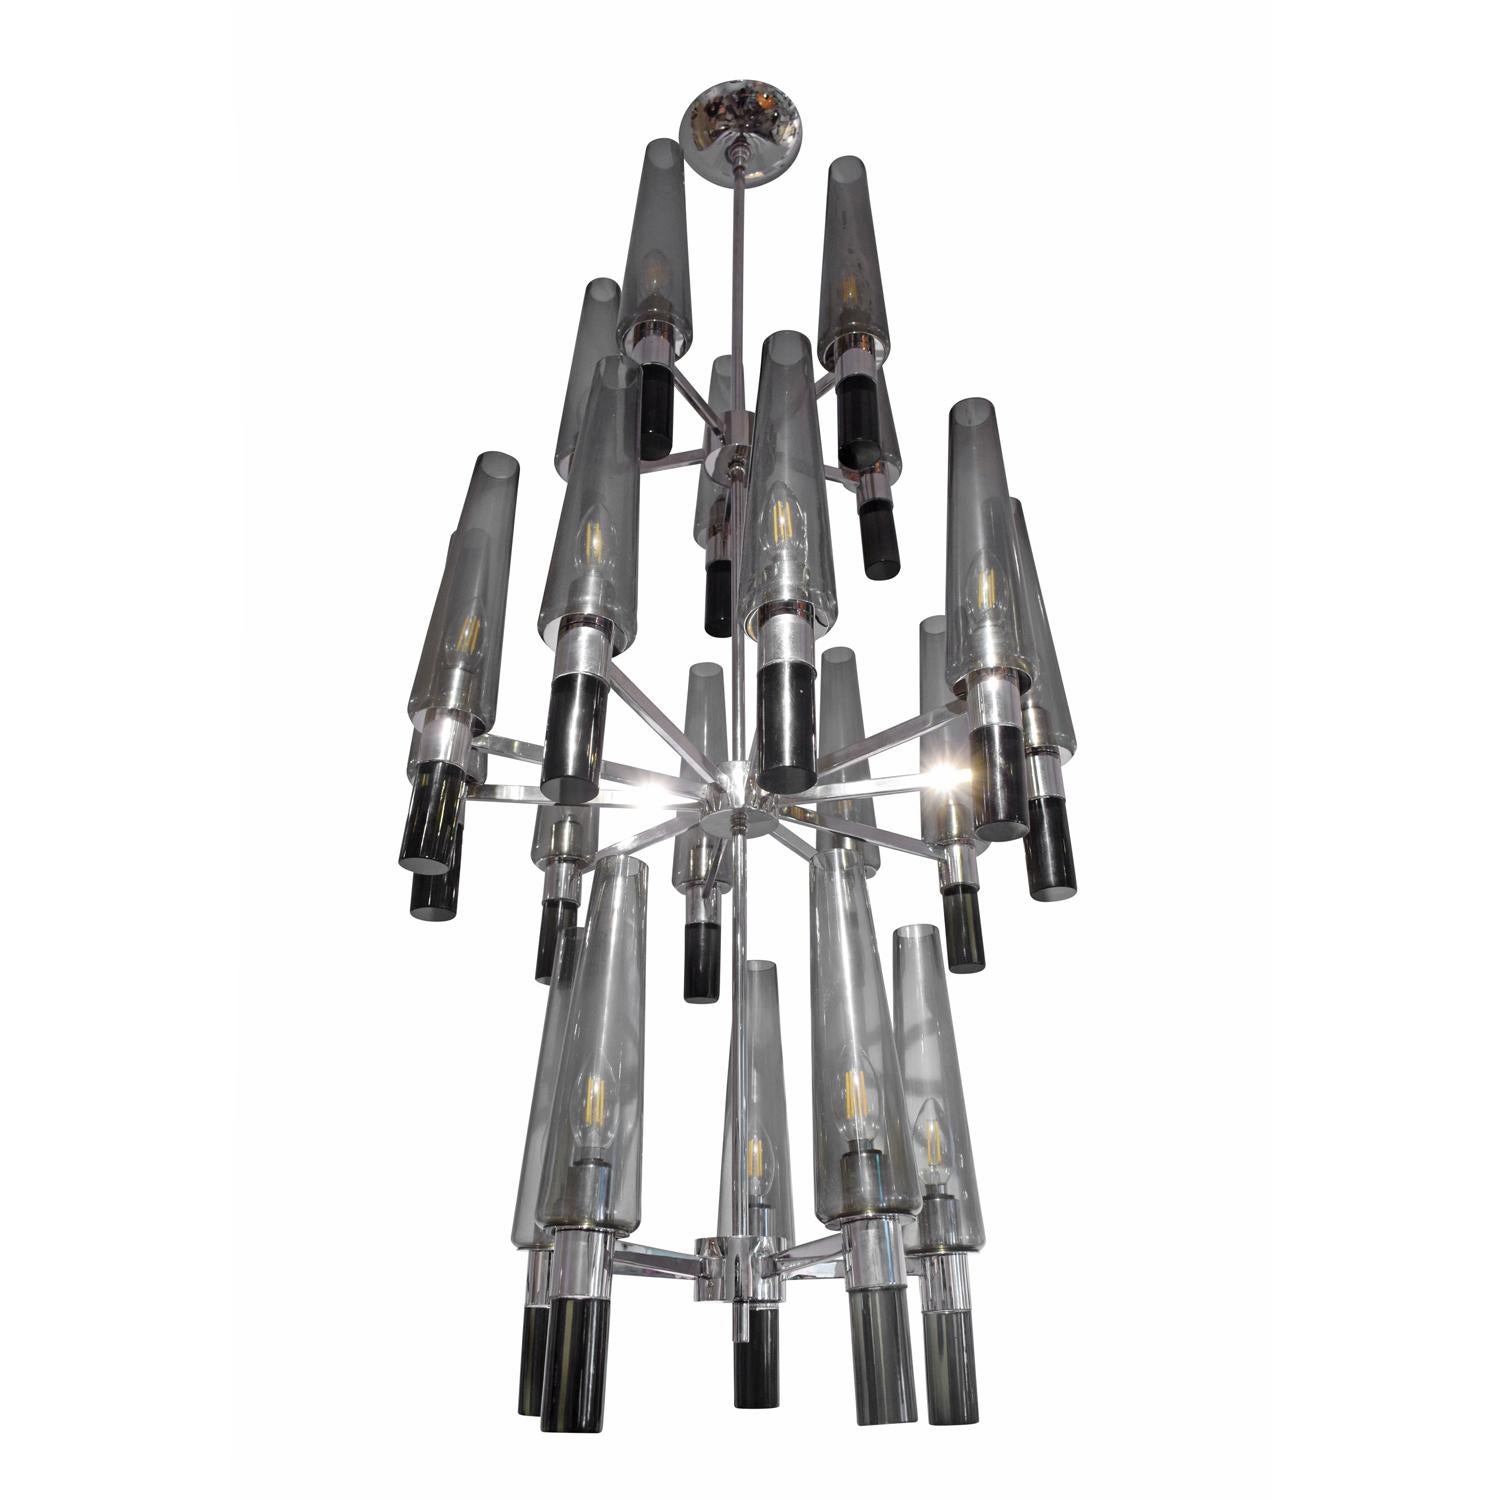 Italian Seguso Exceptional Large Chandelier in Chrome and Smoked Glass Shades, 1990s For Sale